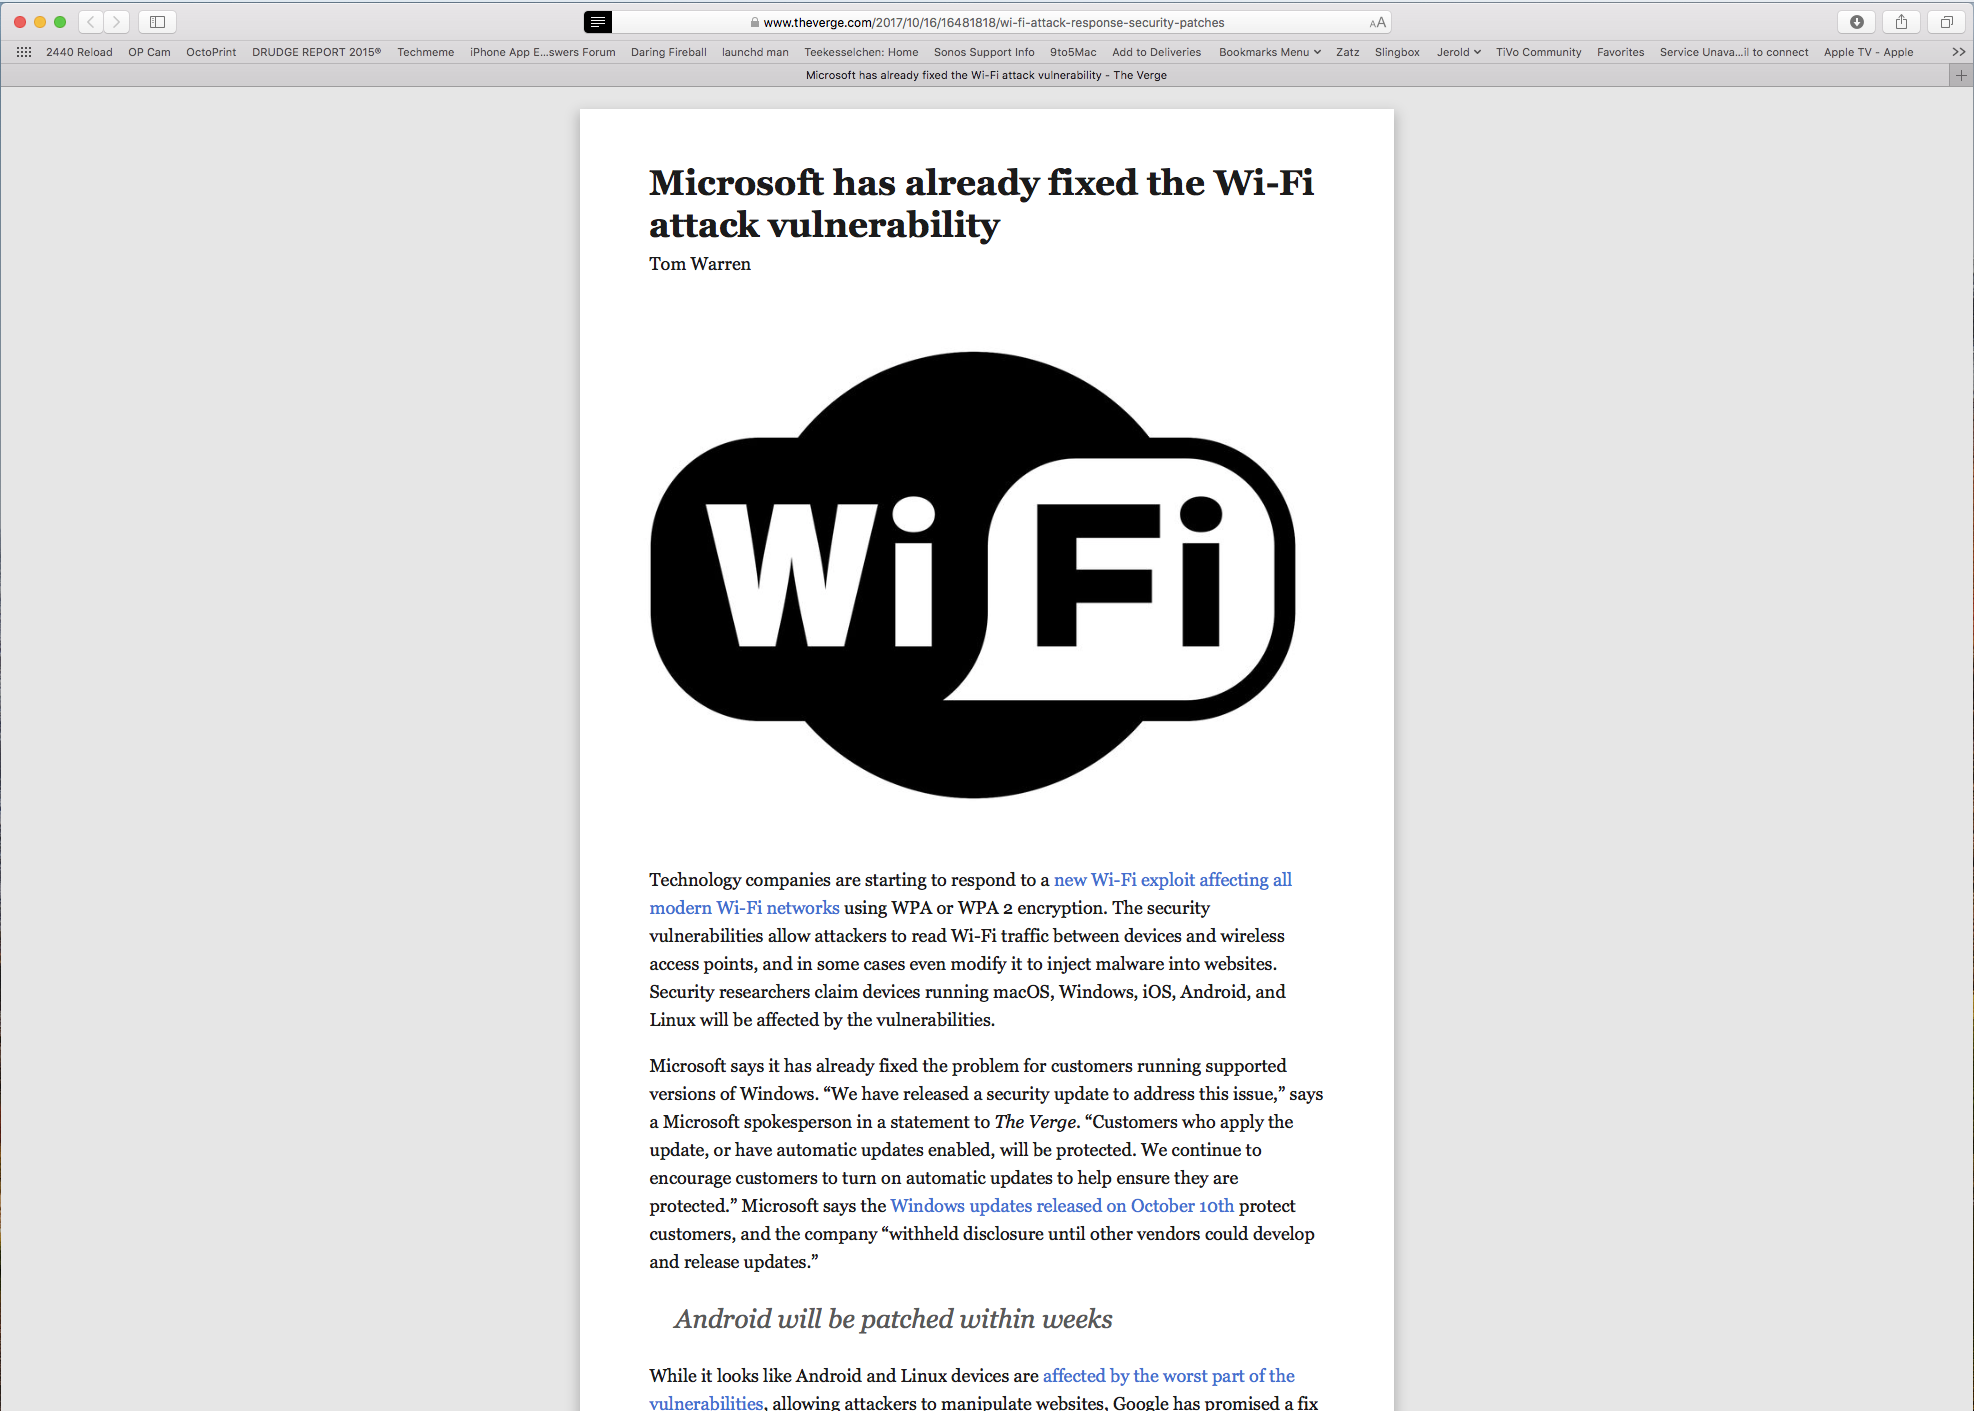 Safari show me suggestion of wiki page in… - Apple Community